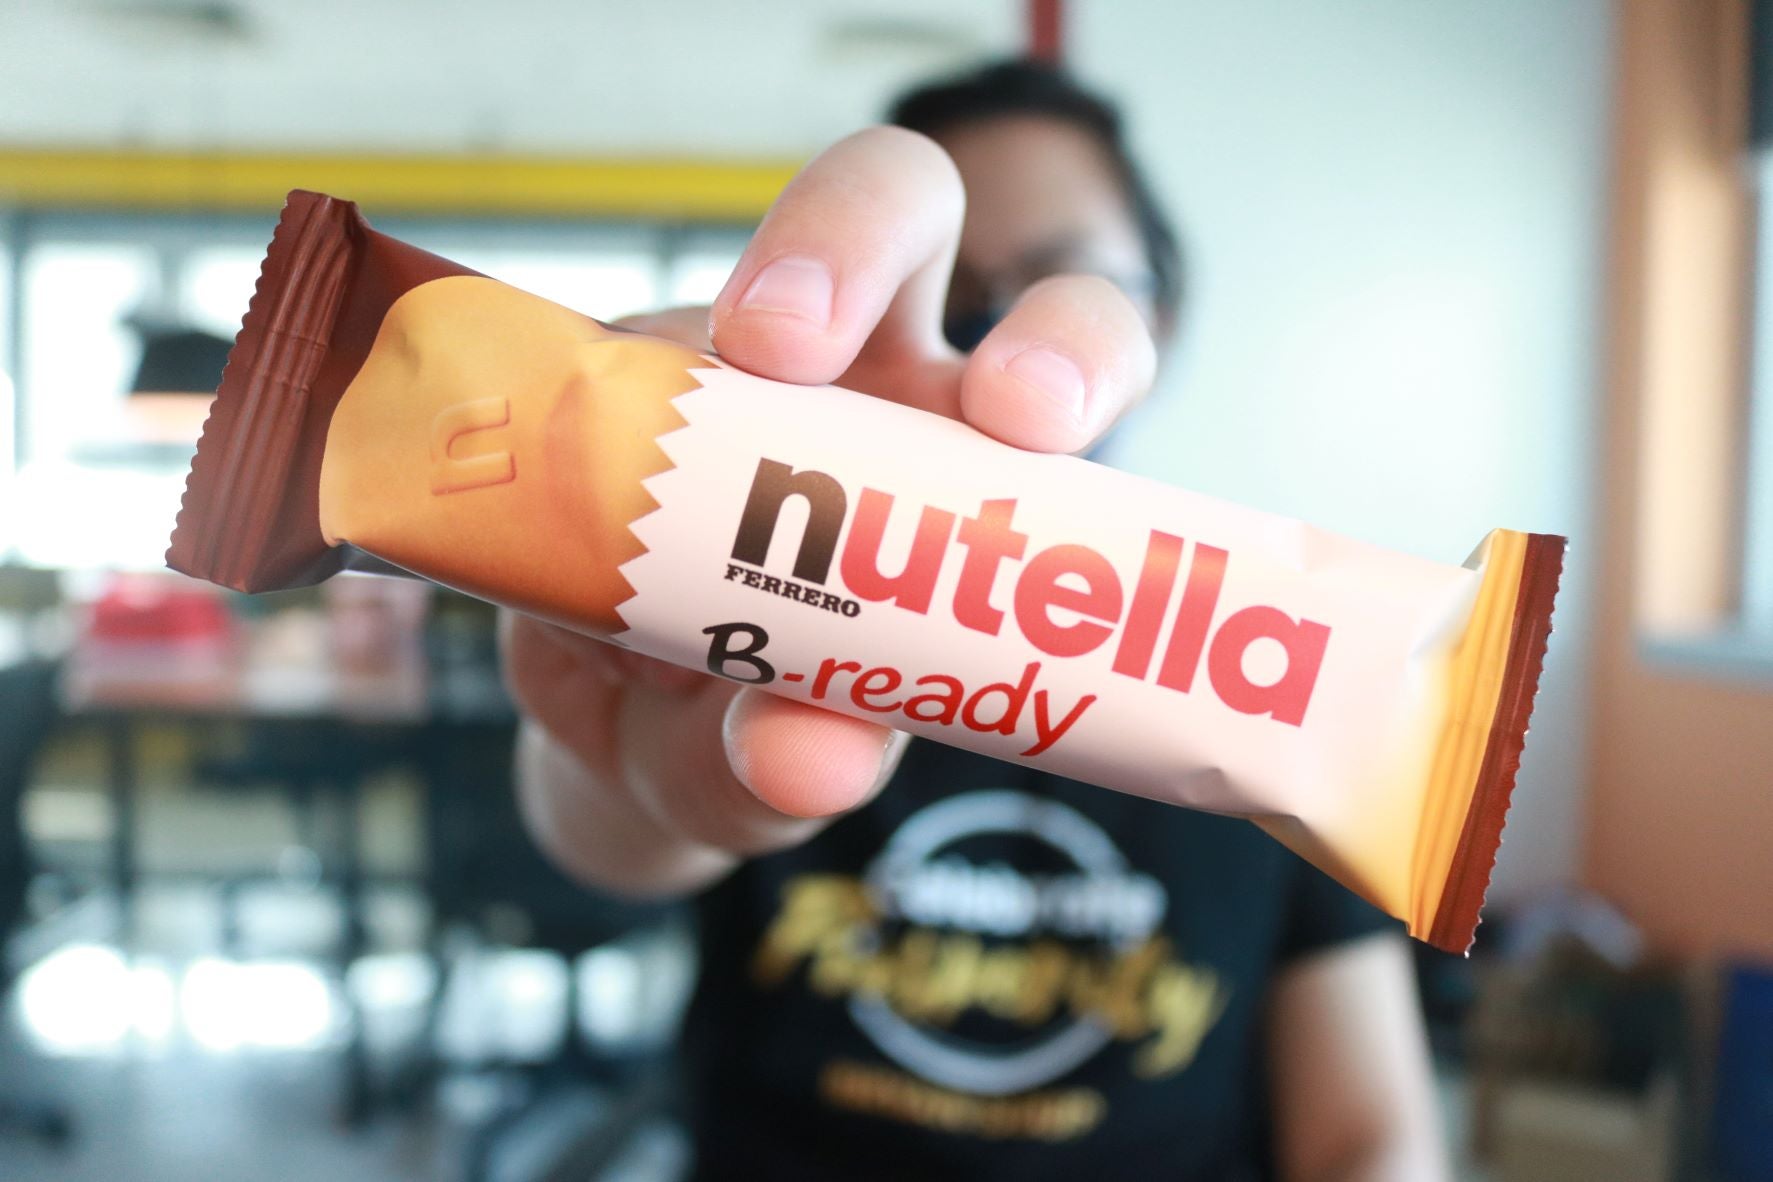 NutellaBready Bar pose